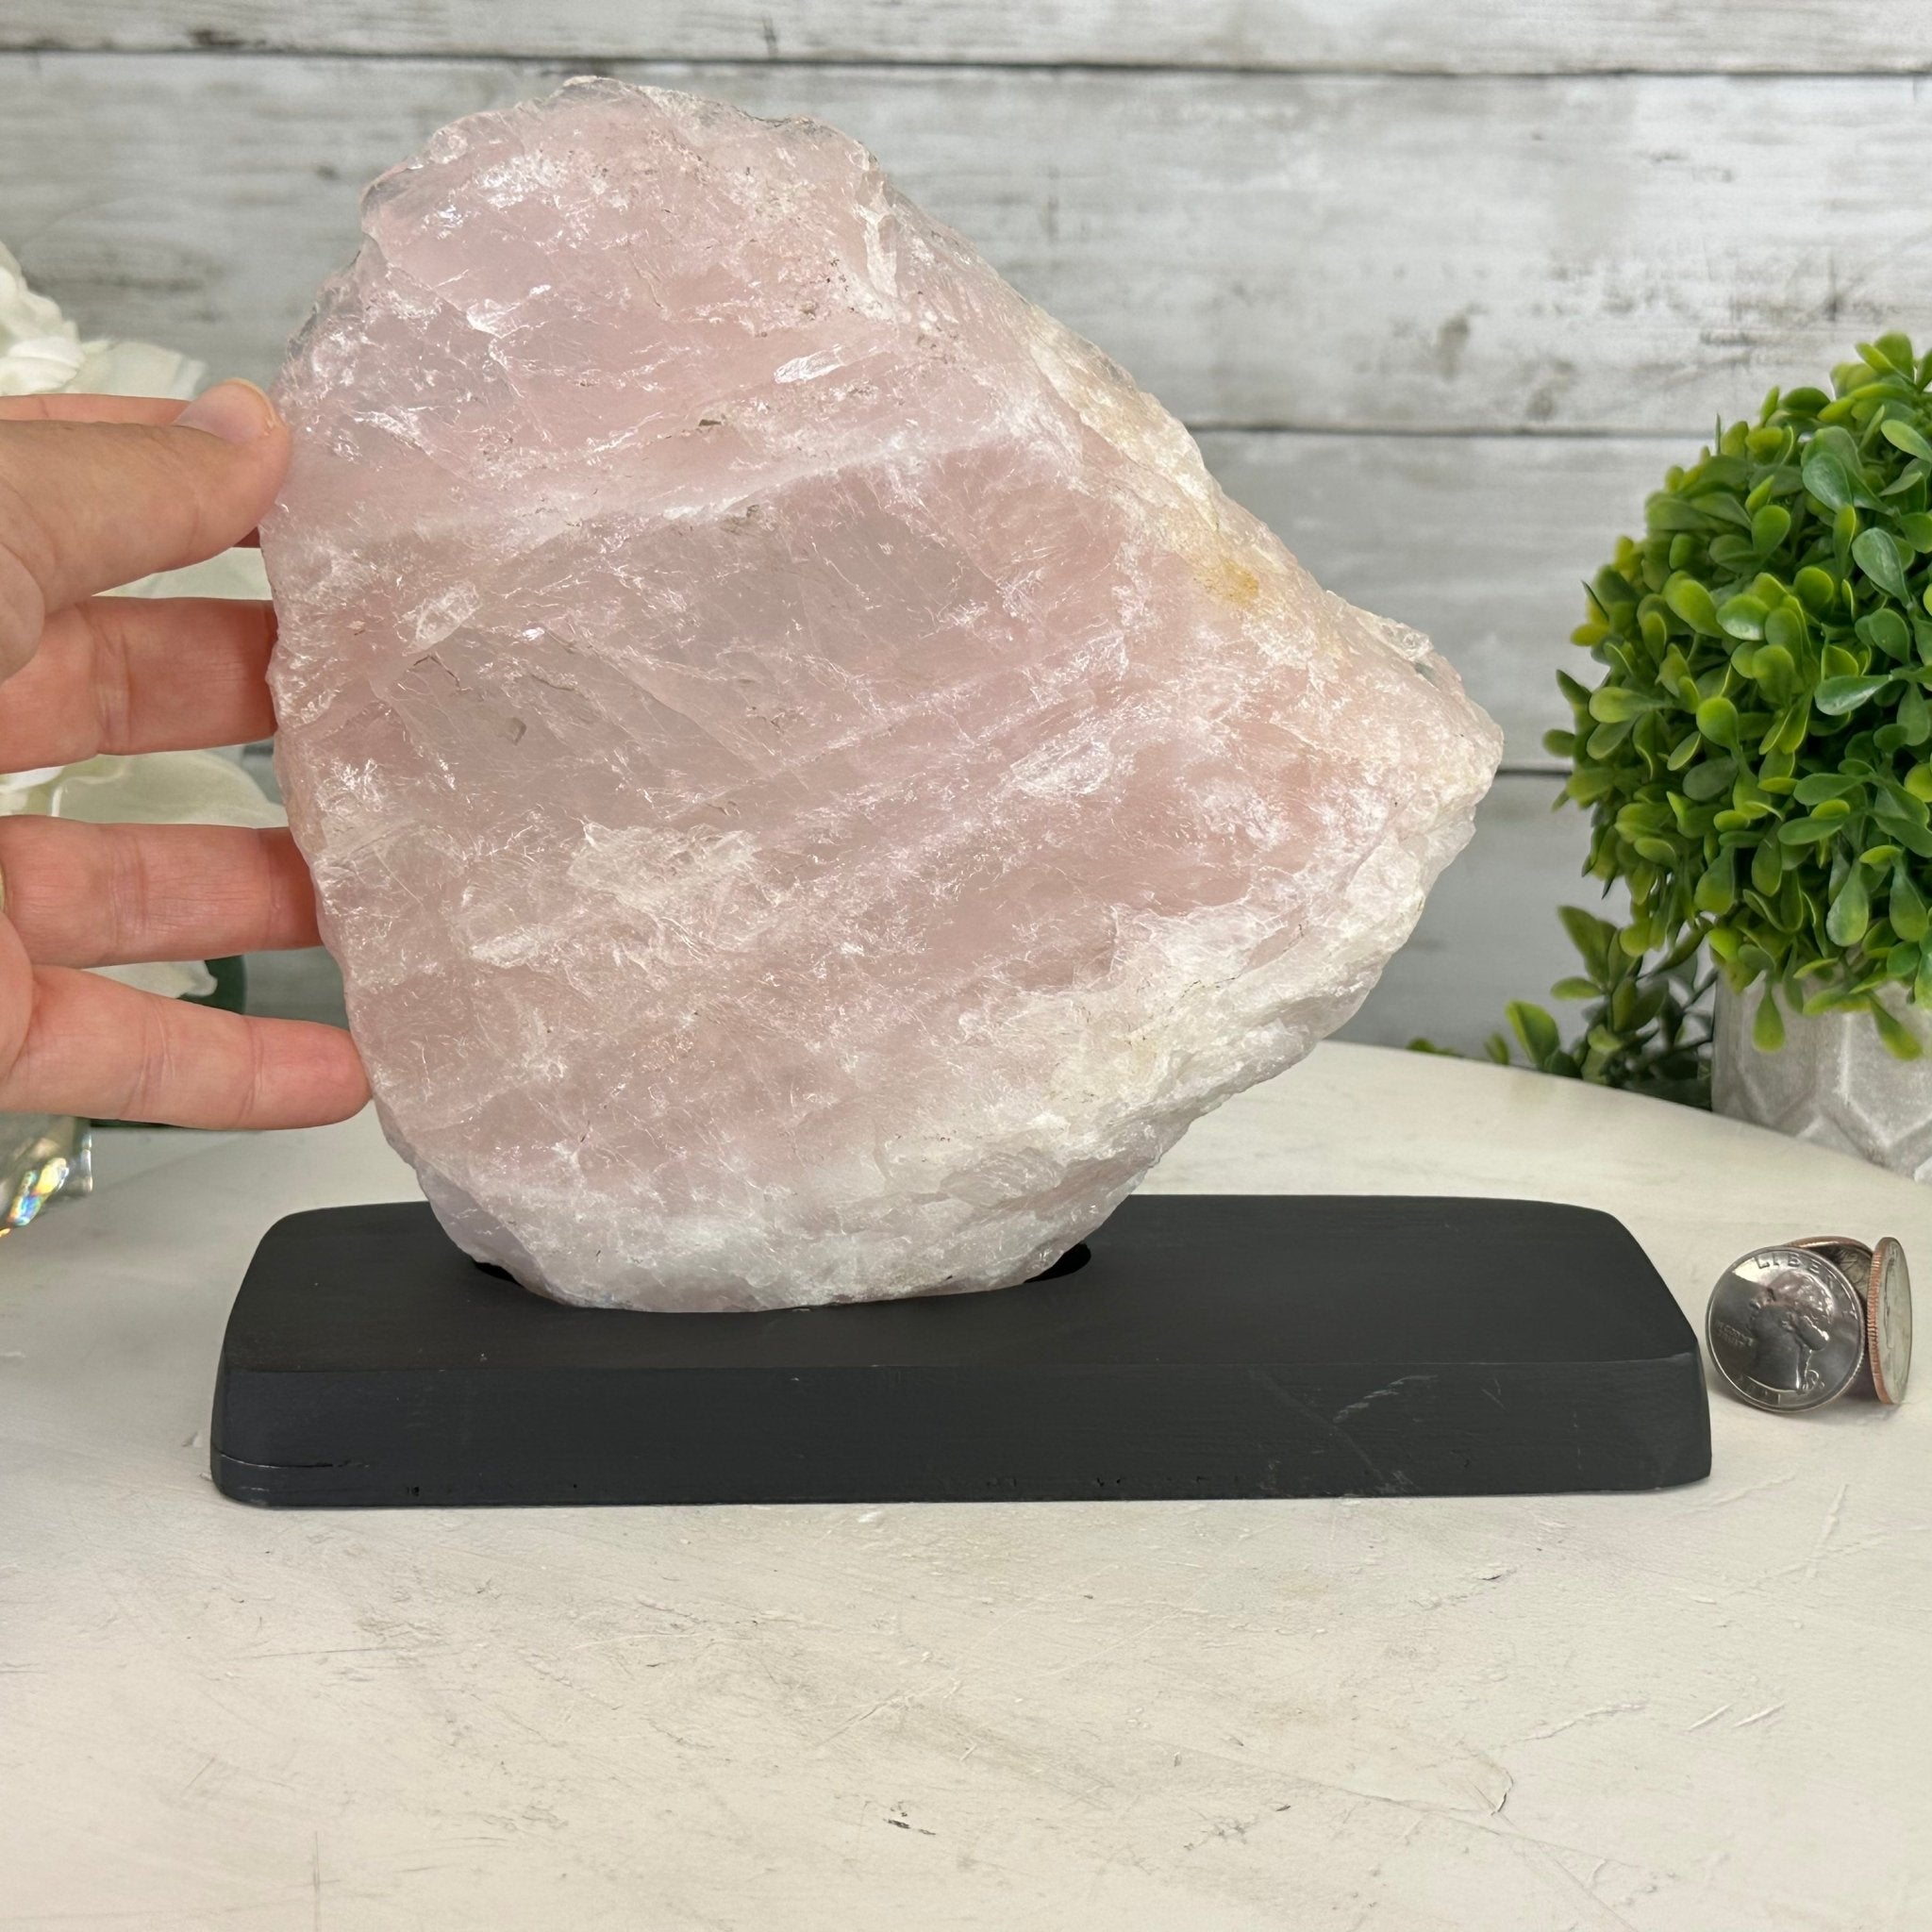 Rose Quartz Polished Slice with Rough Edges on a Wood Base Model 7.5" Tall Model #6100RQ-011 by Brazil Gems - Brazil GemsBrazil GemsRose Quartz Polished Slice with Rough Edges on a Wood Base Model 7.5" Tall Model #6100RQ-011 by Brazil GemsSlices on Wood Bases6100RQ-011